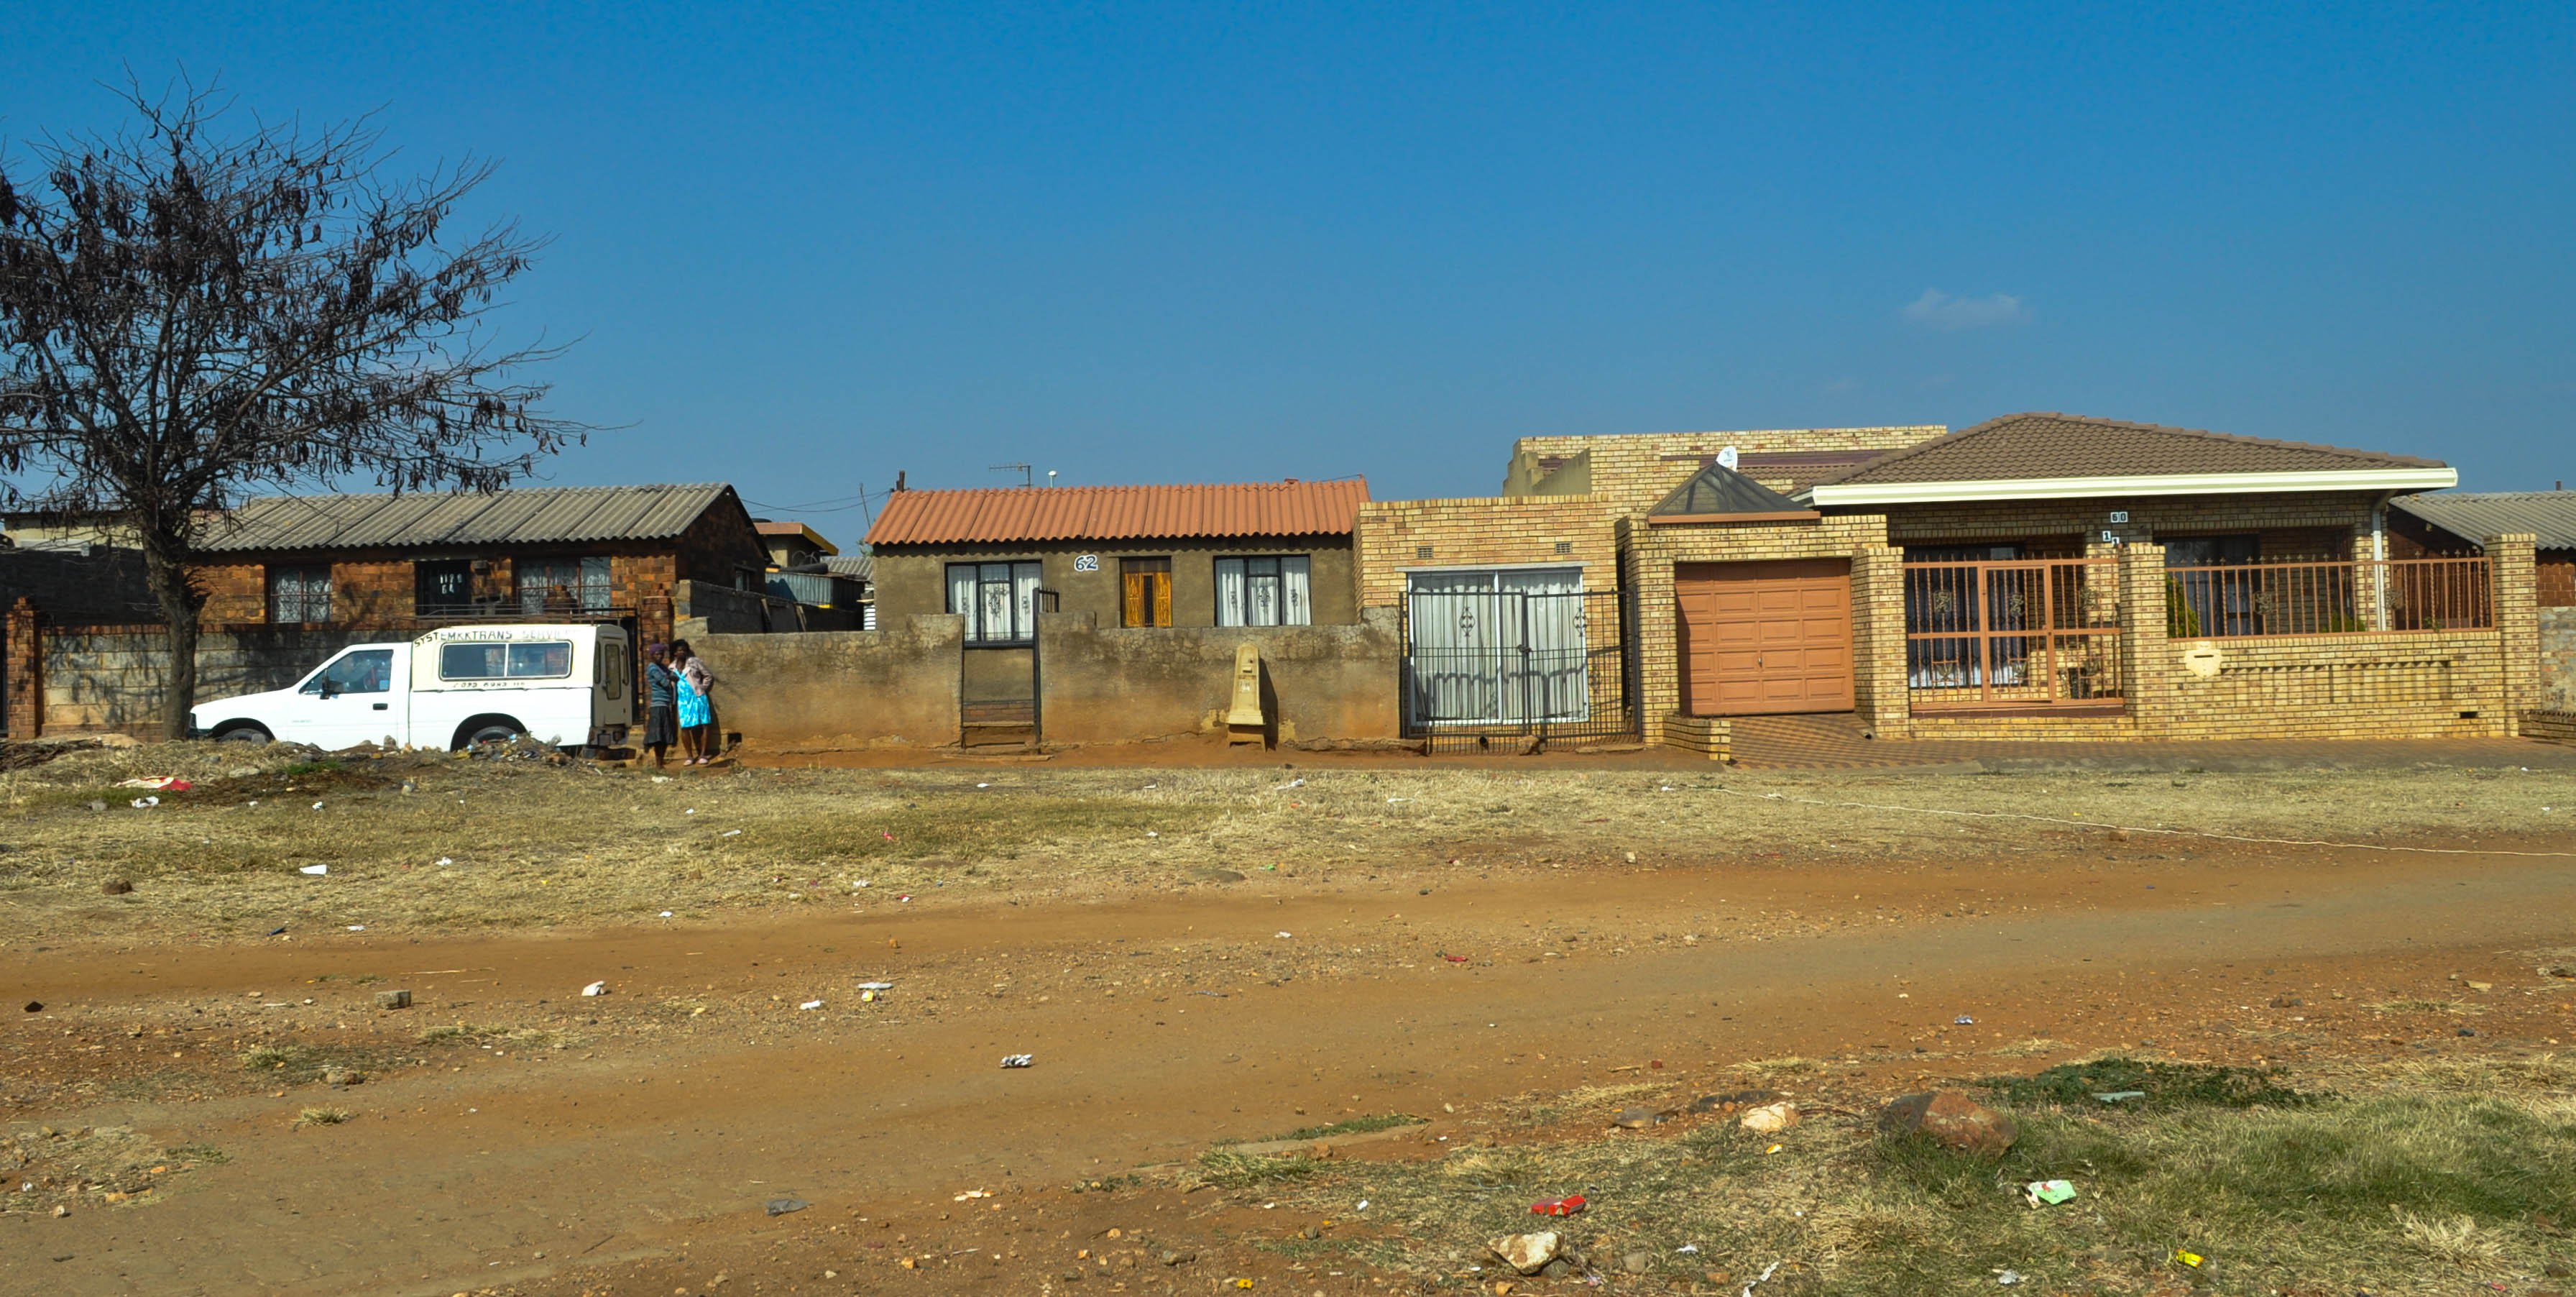 The evolution of township homes. Different phases of urban development all on the same street.